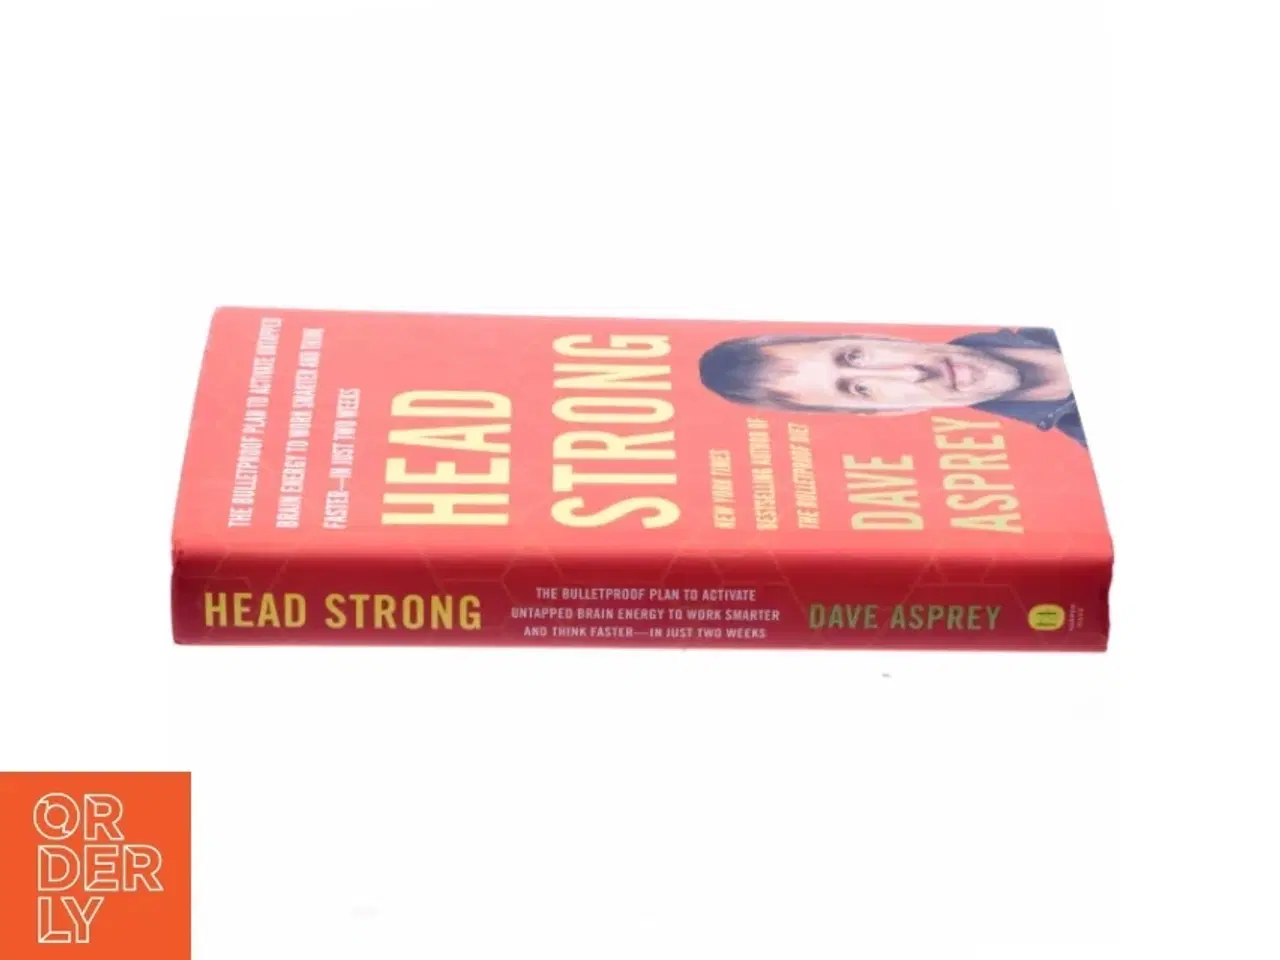 Billede 2 - Head strong : the bulletproof plan to activate untapped brain energy to work smarter and think faster-in just two weeks af Dave Asprey (Bog)